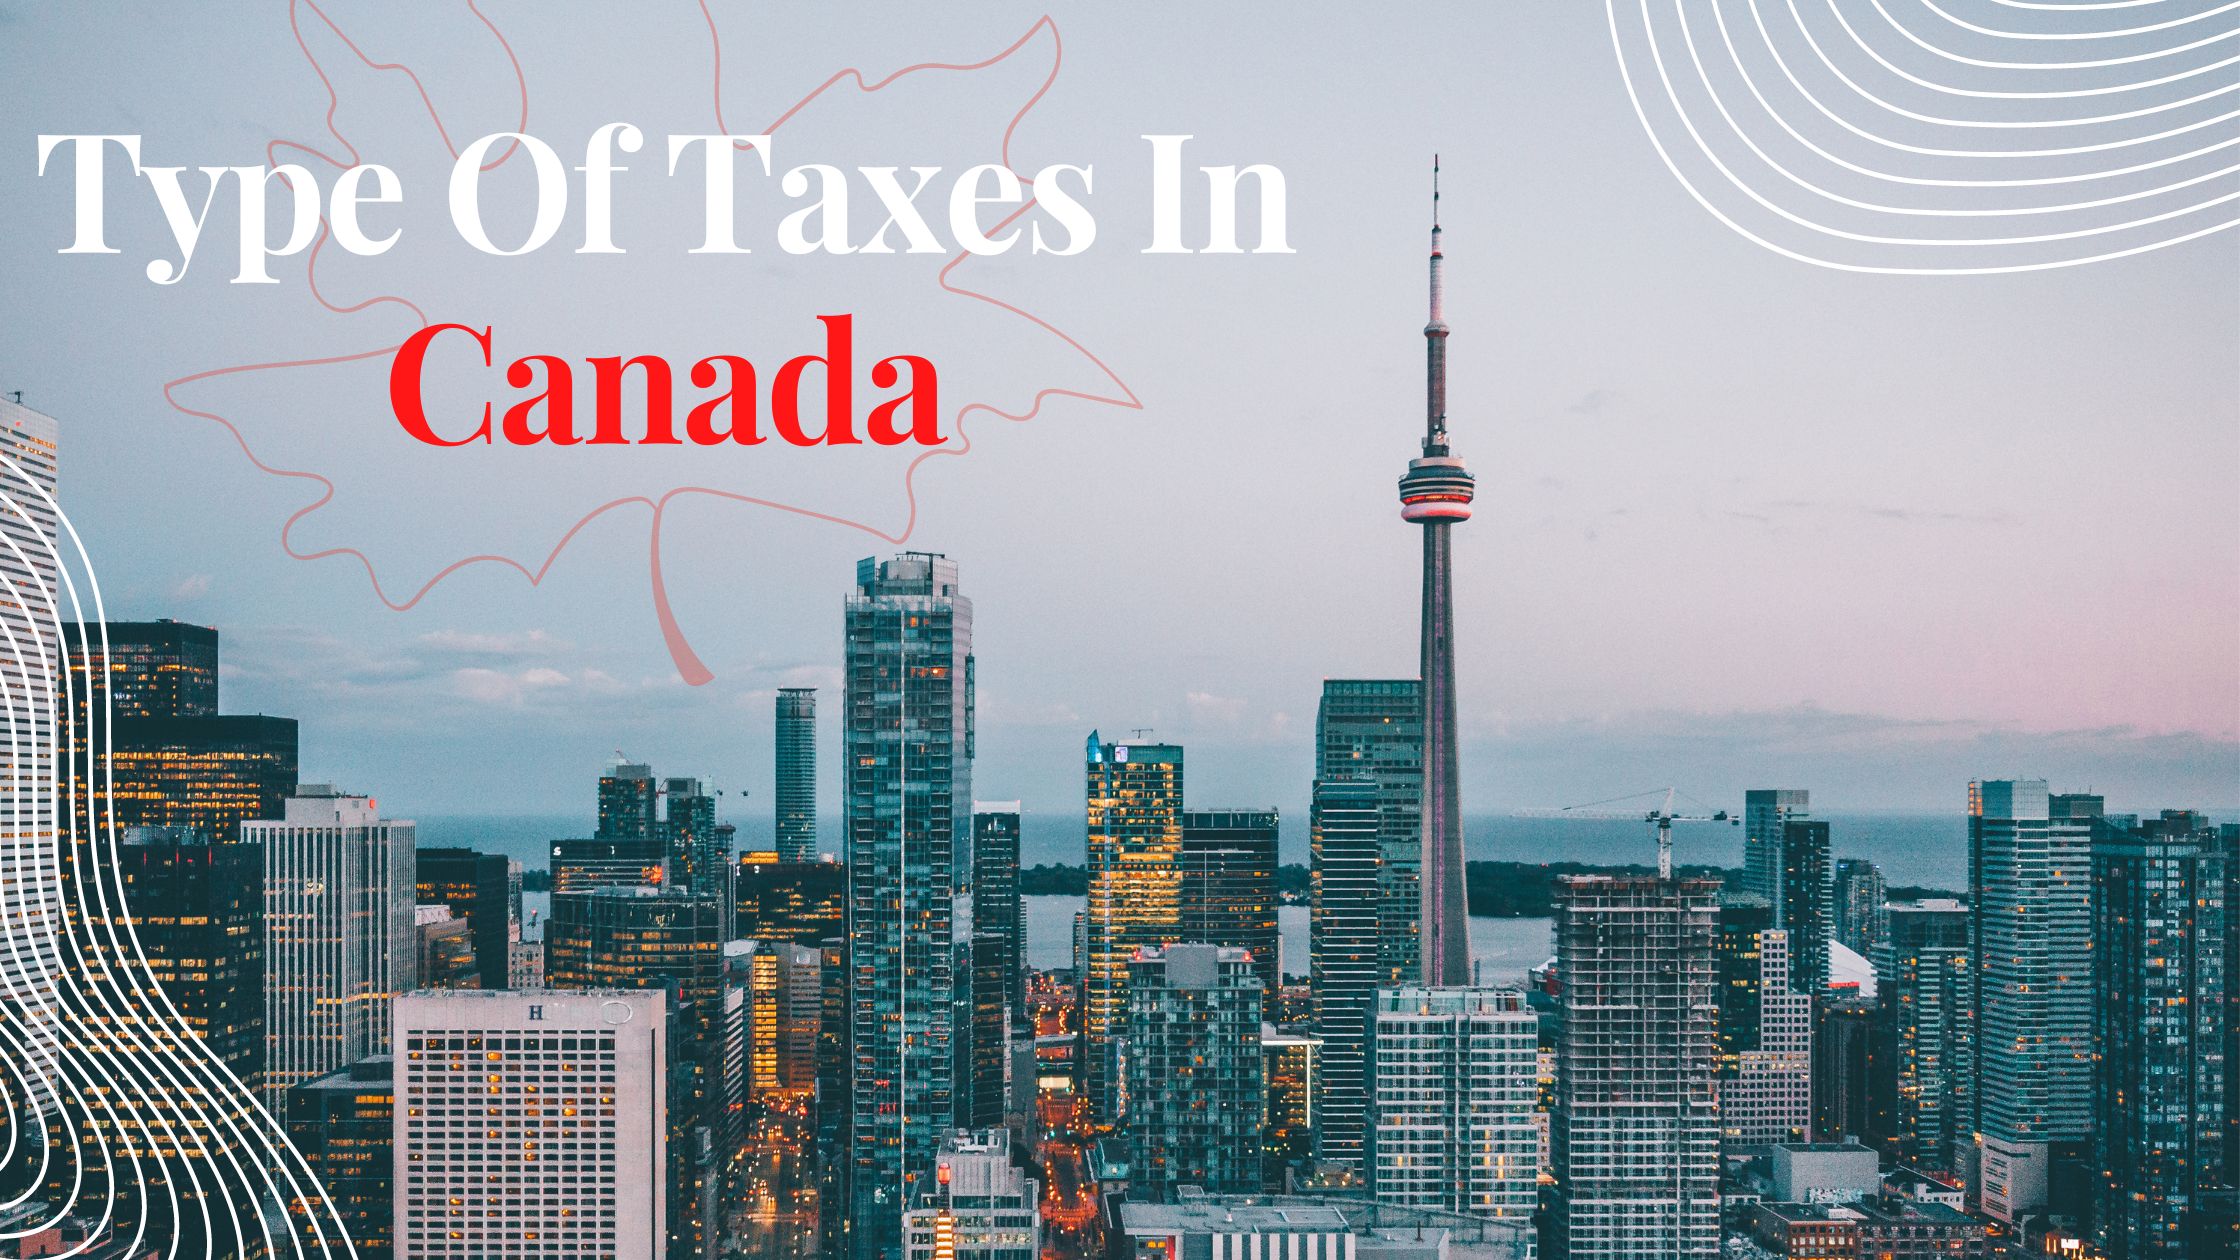 Type of taxes in Canada | The Accounting & Tax